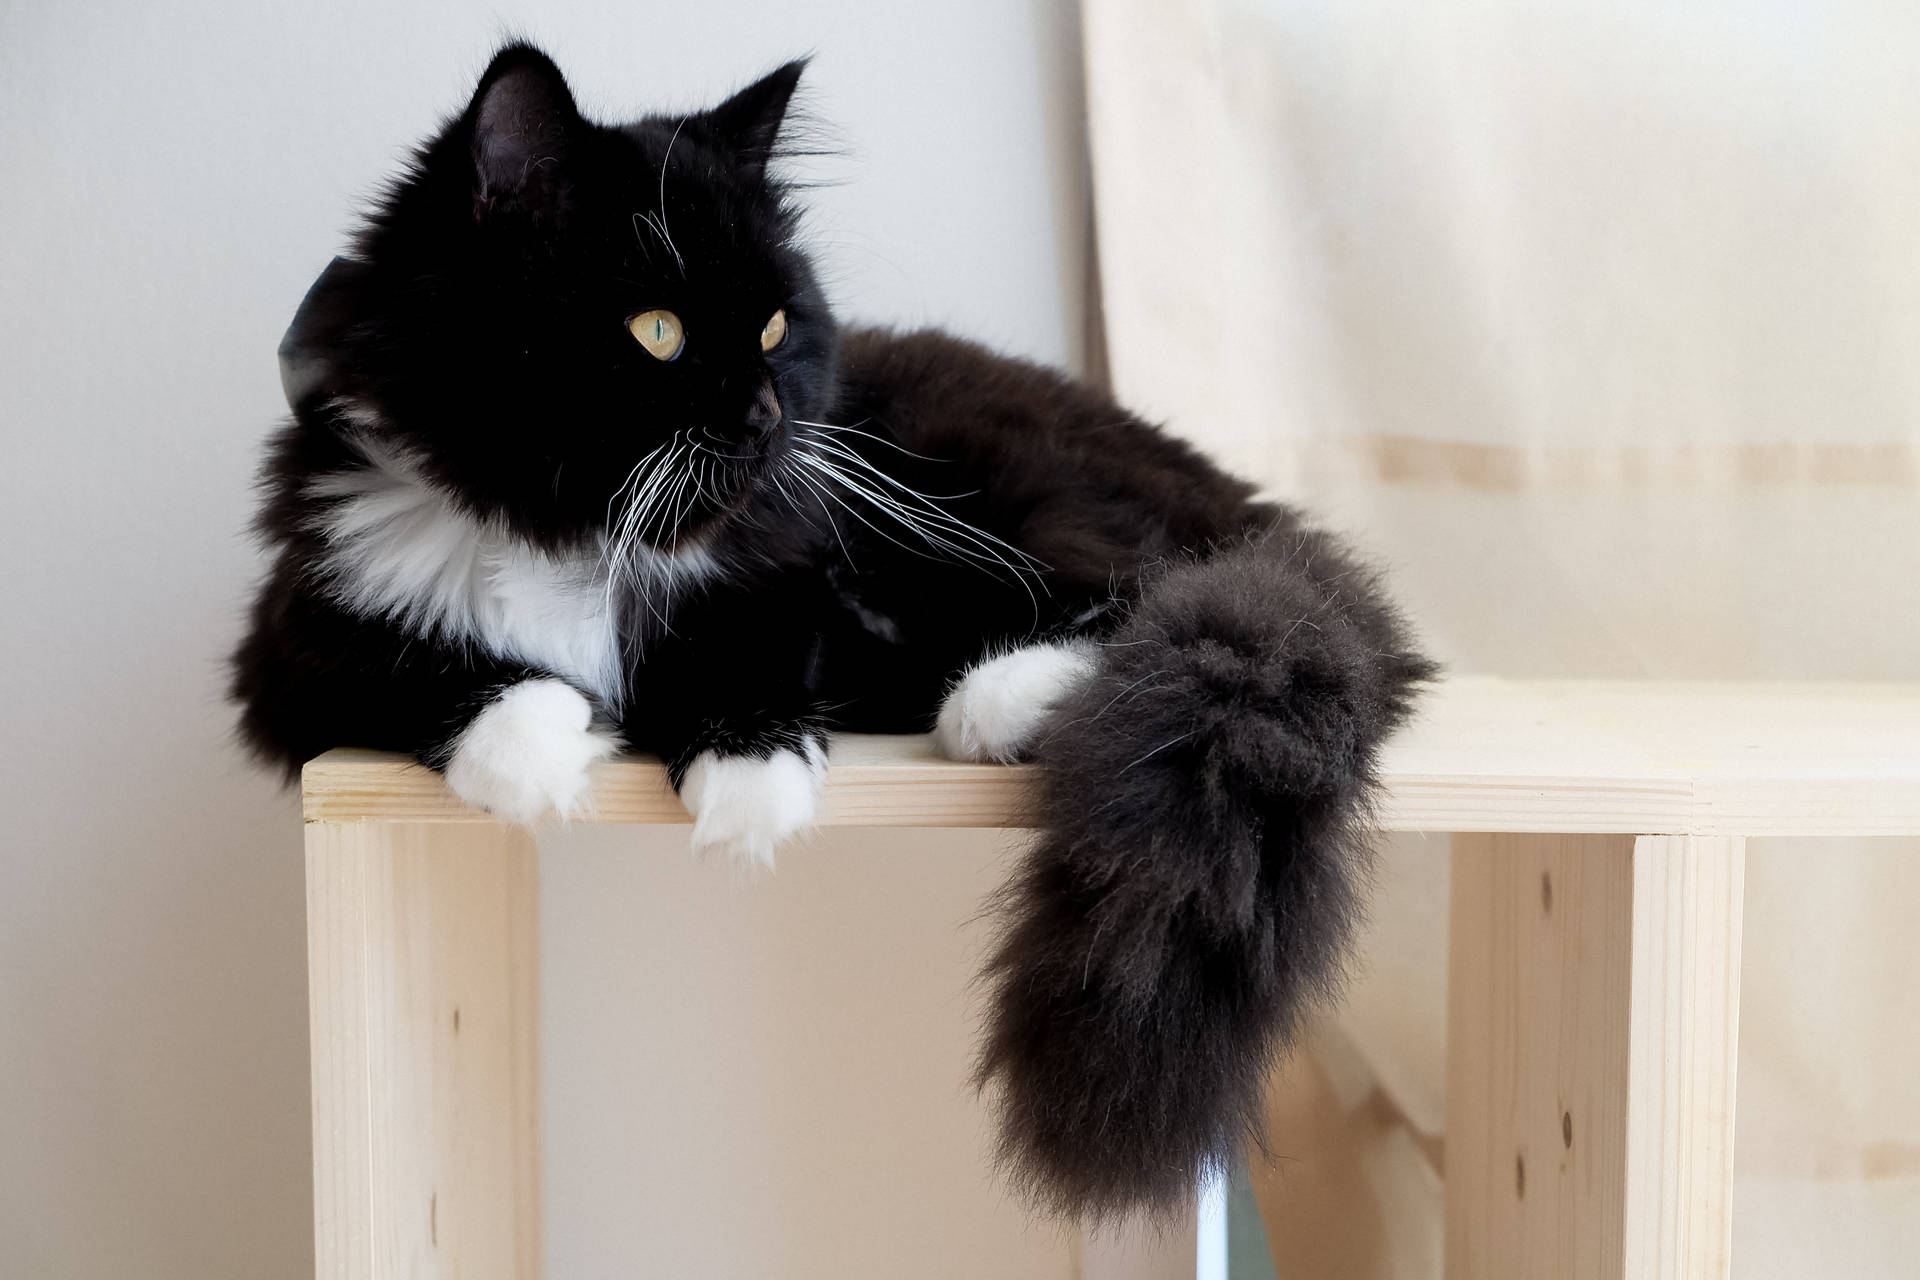 Fluffy Black Cat Wood Table Background